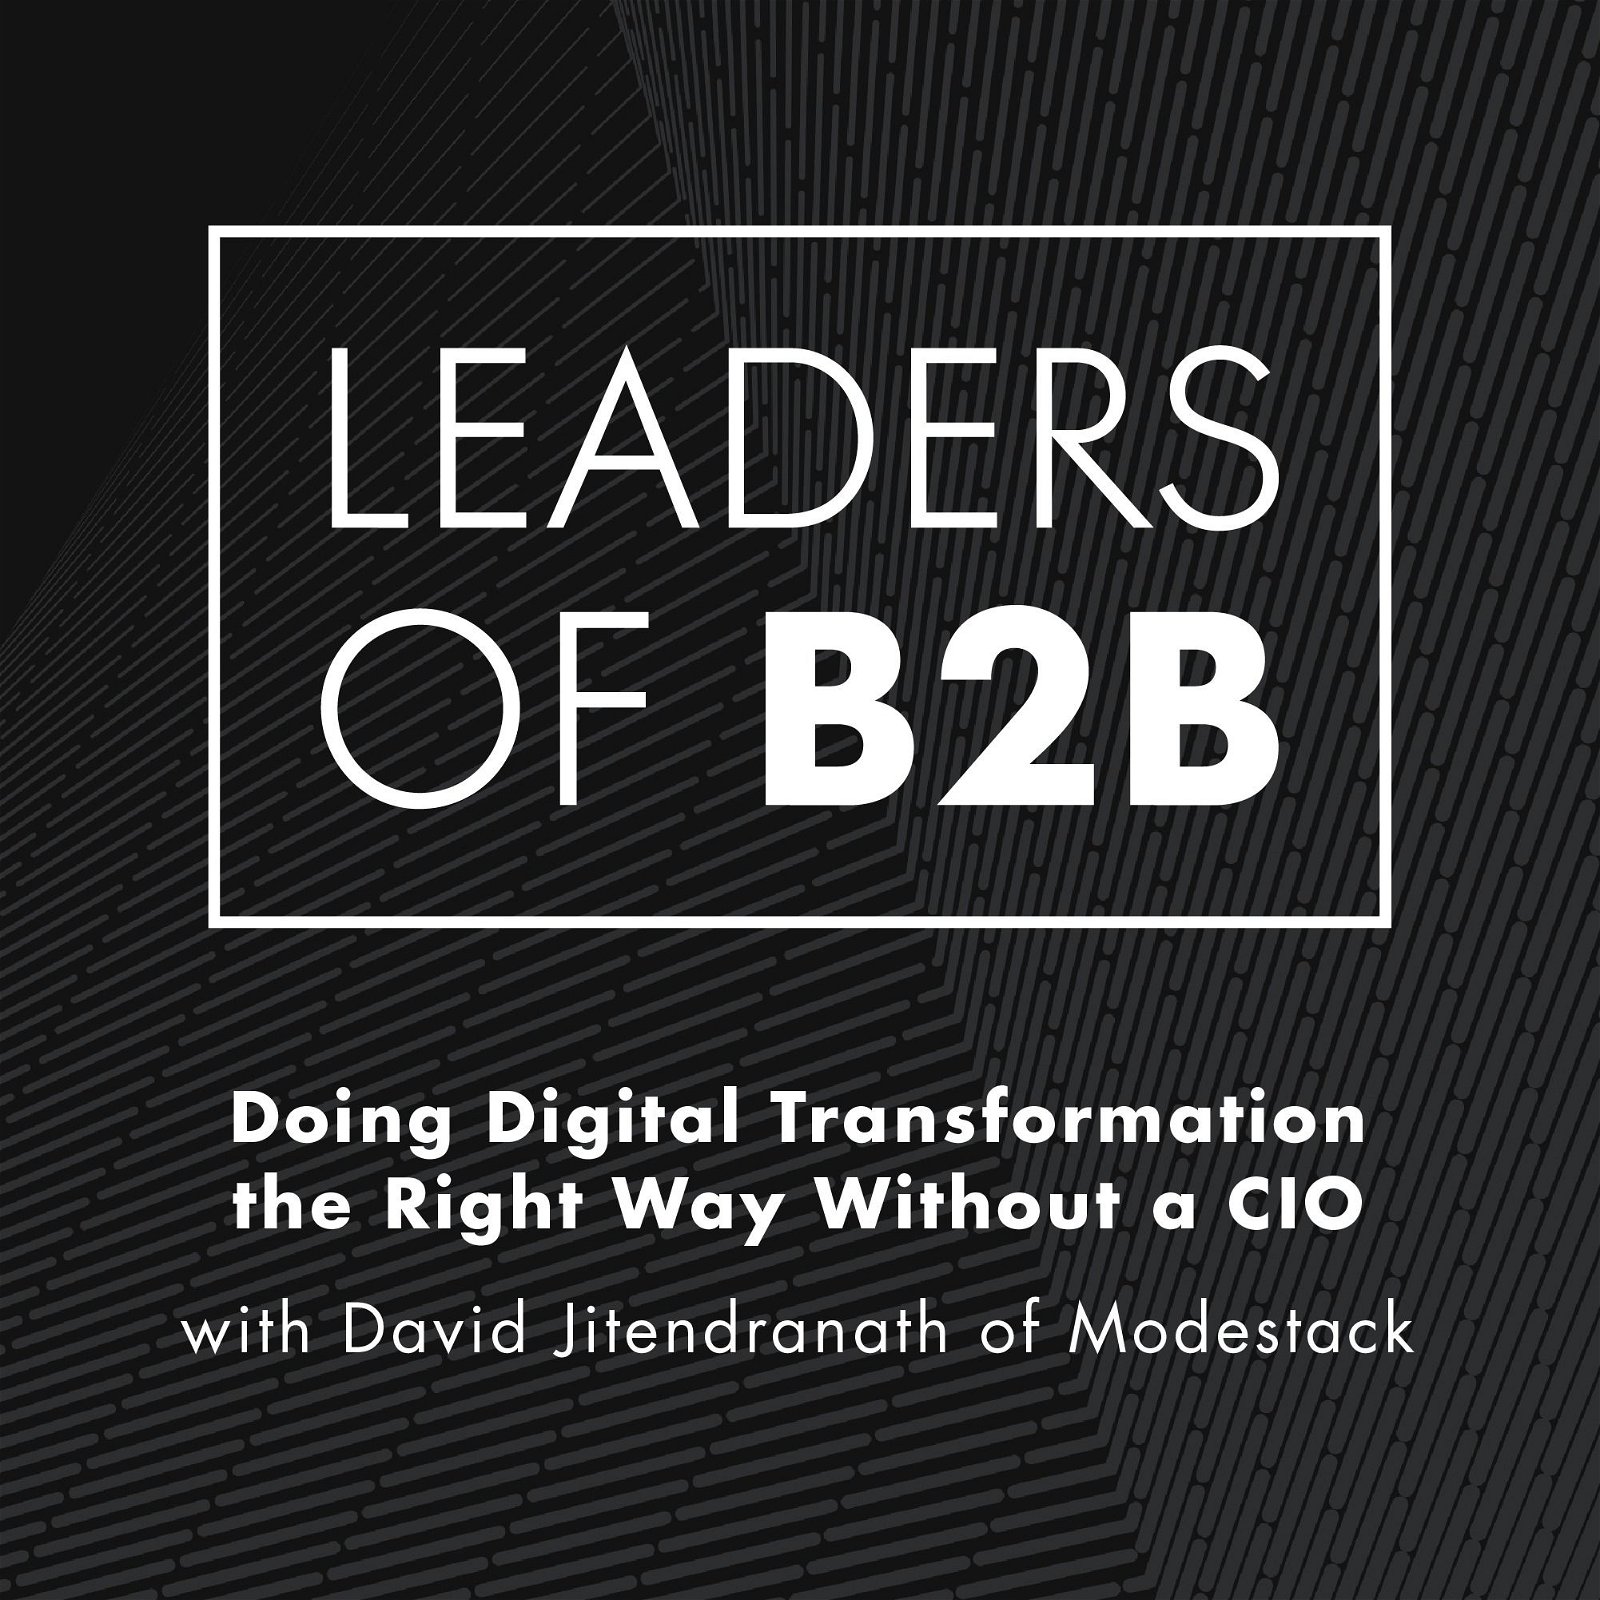 Doing Digital Transformation the Right Way Without a CIO with David Jitendranath of Modestack